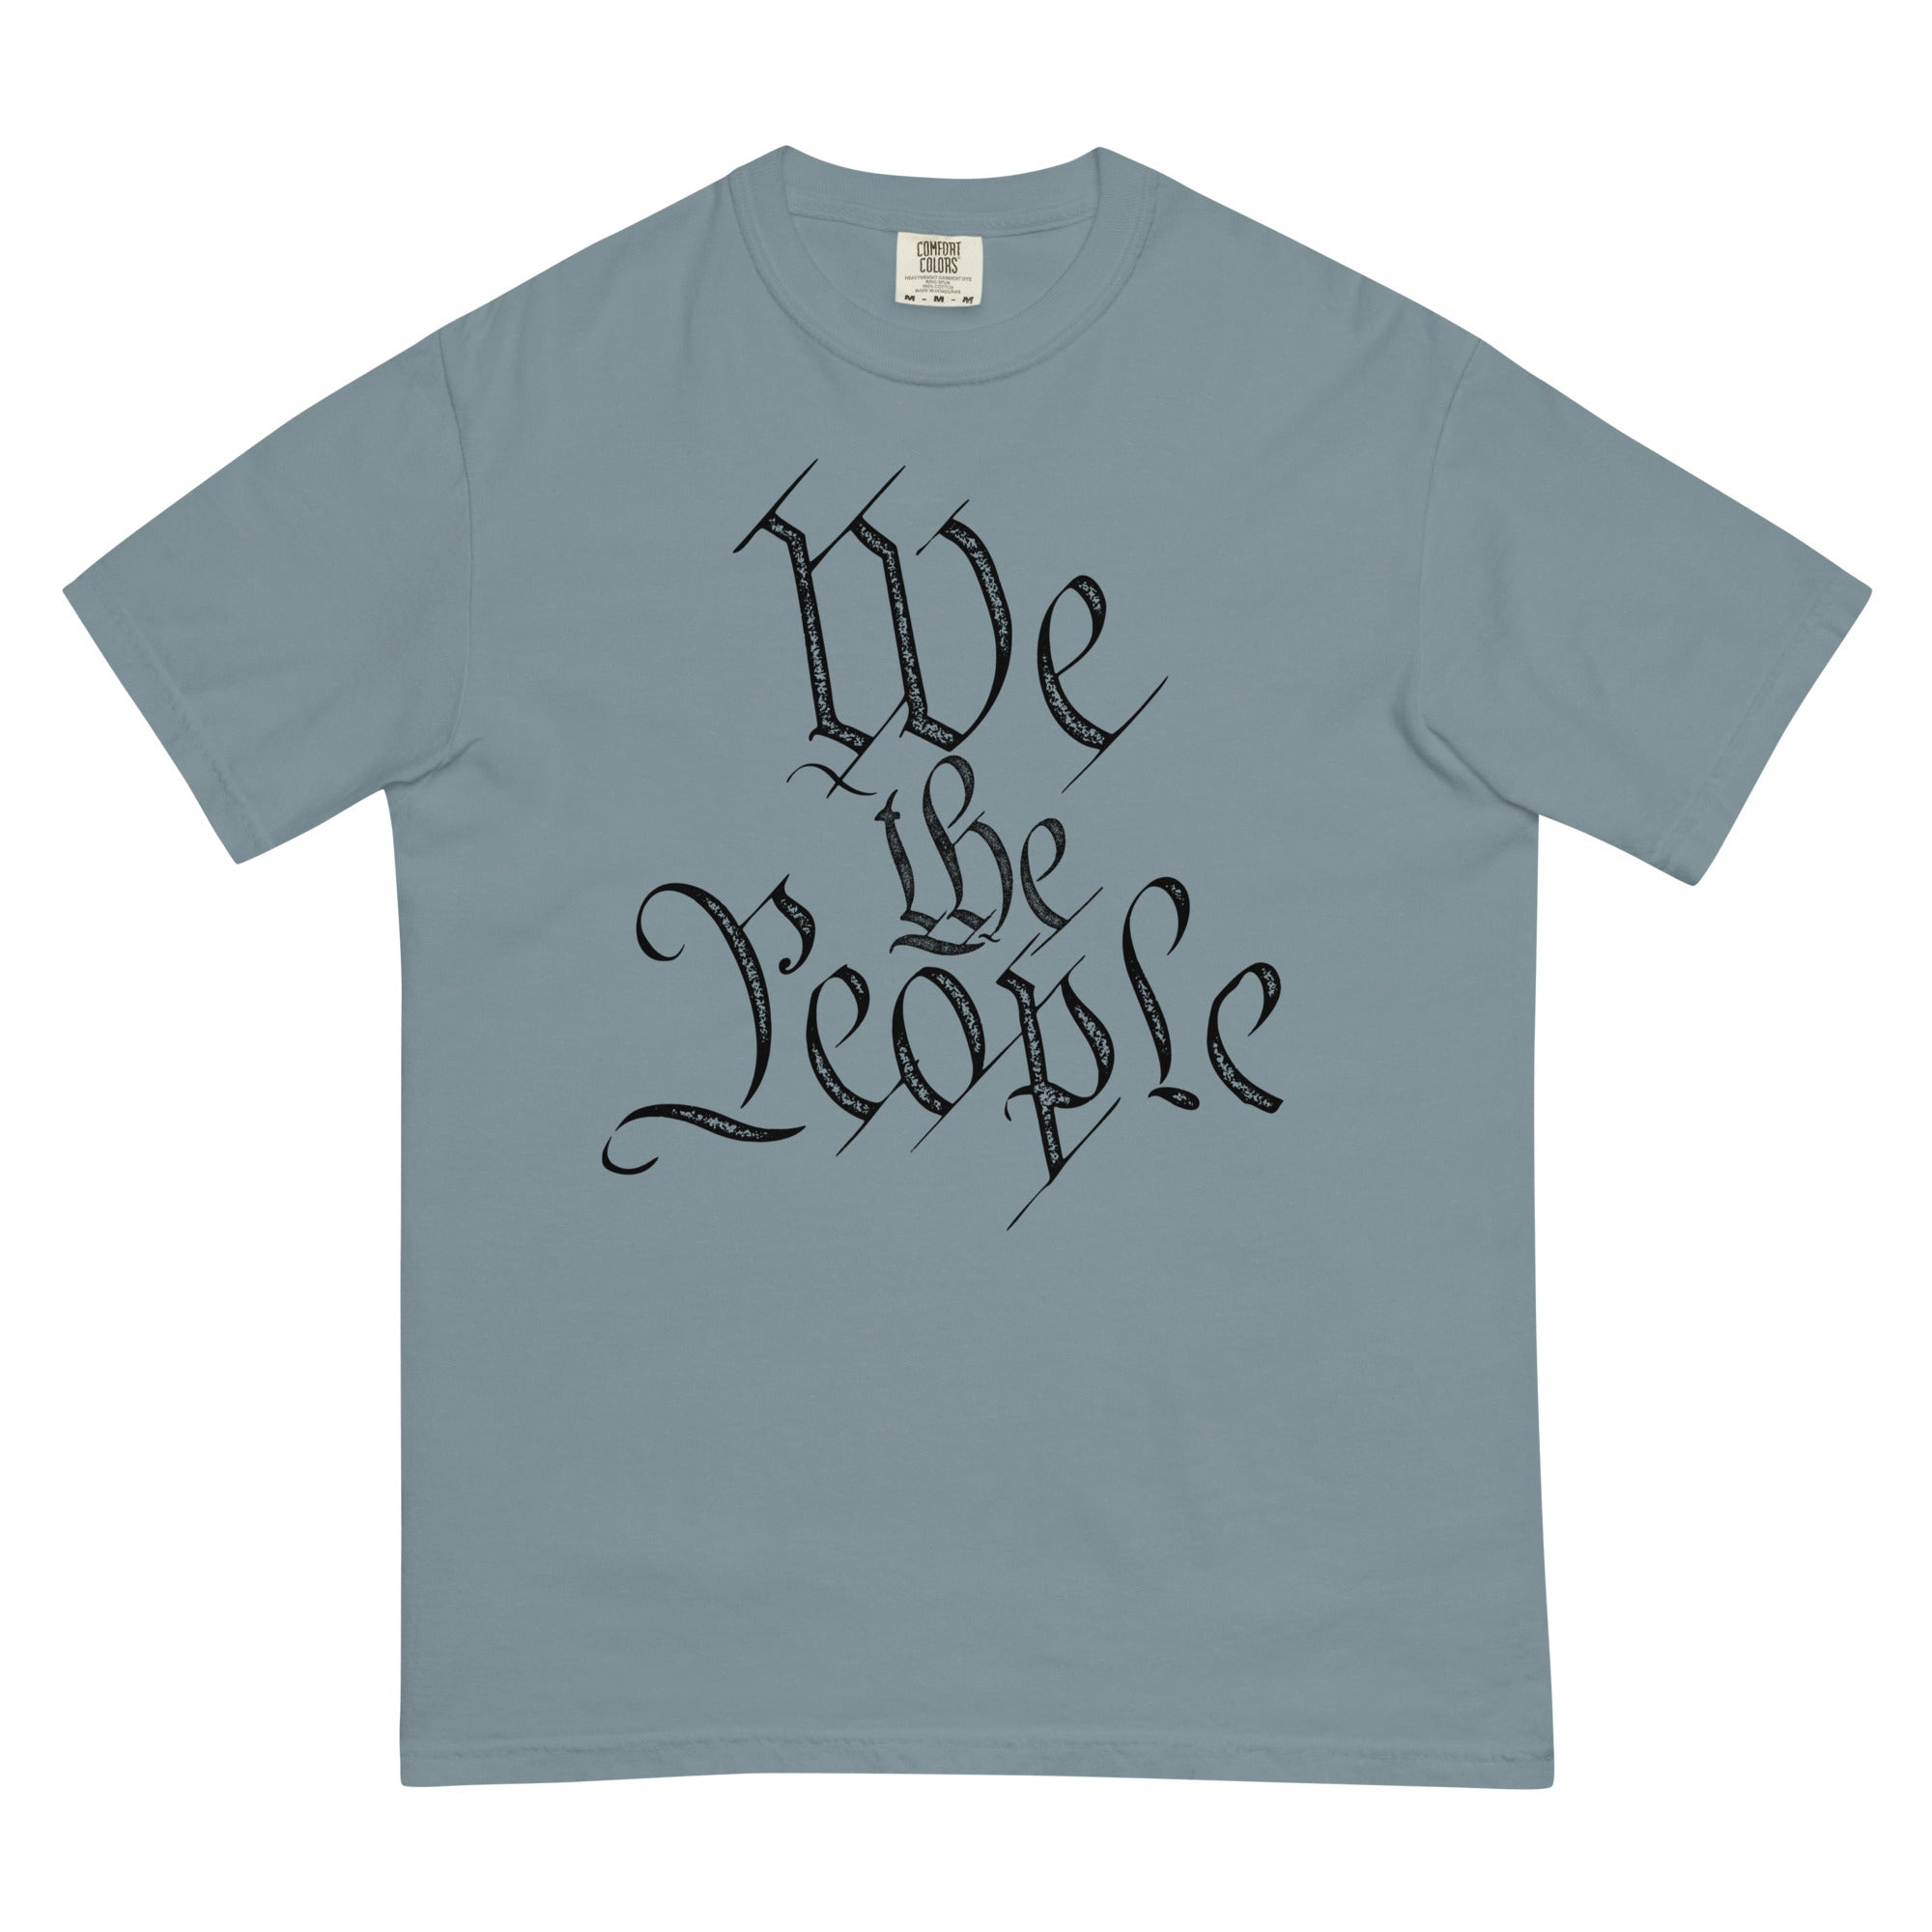 We The People Garment-dyed Heavyweight T-shirt